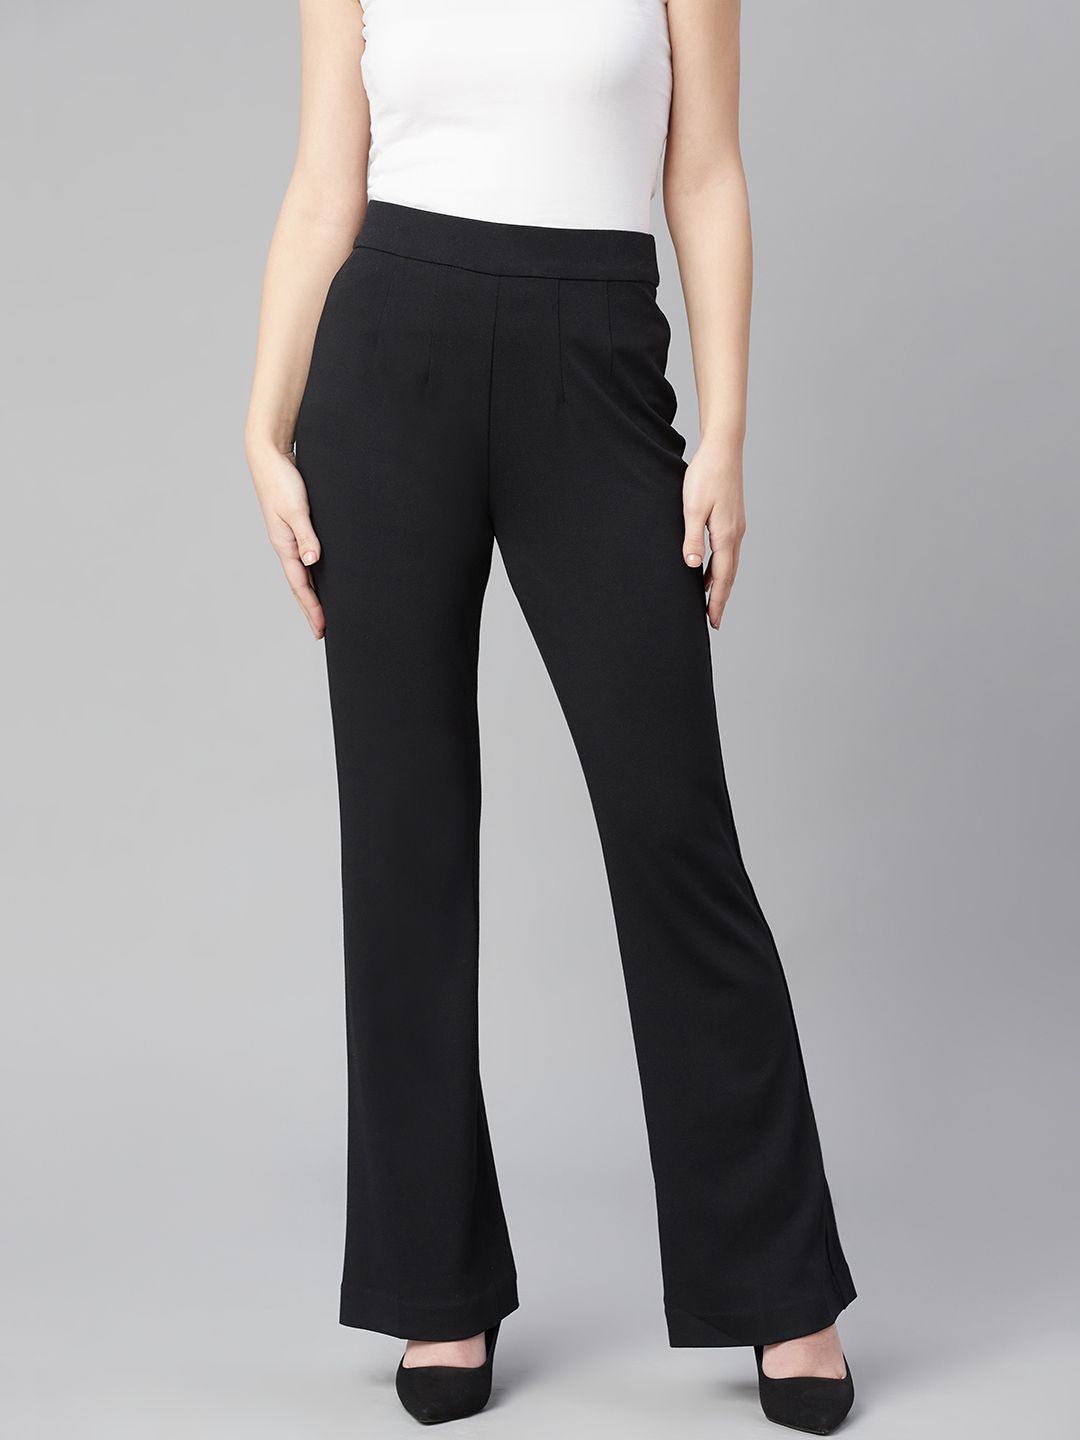 Marks & Spencer Women Black Solid Pleated Flared Trousers Price in India